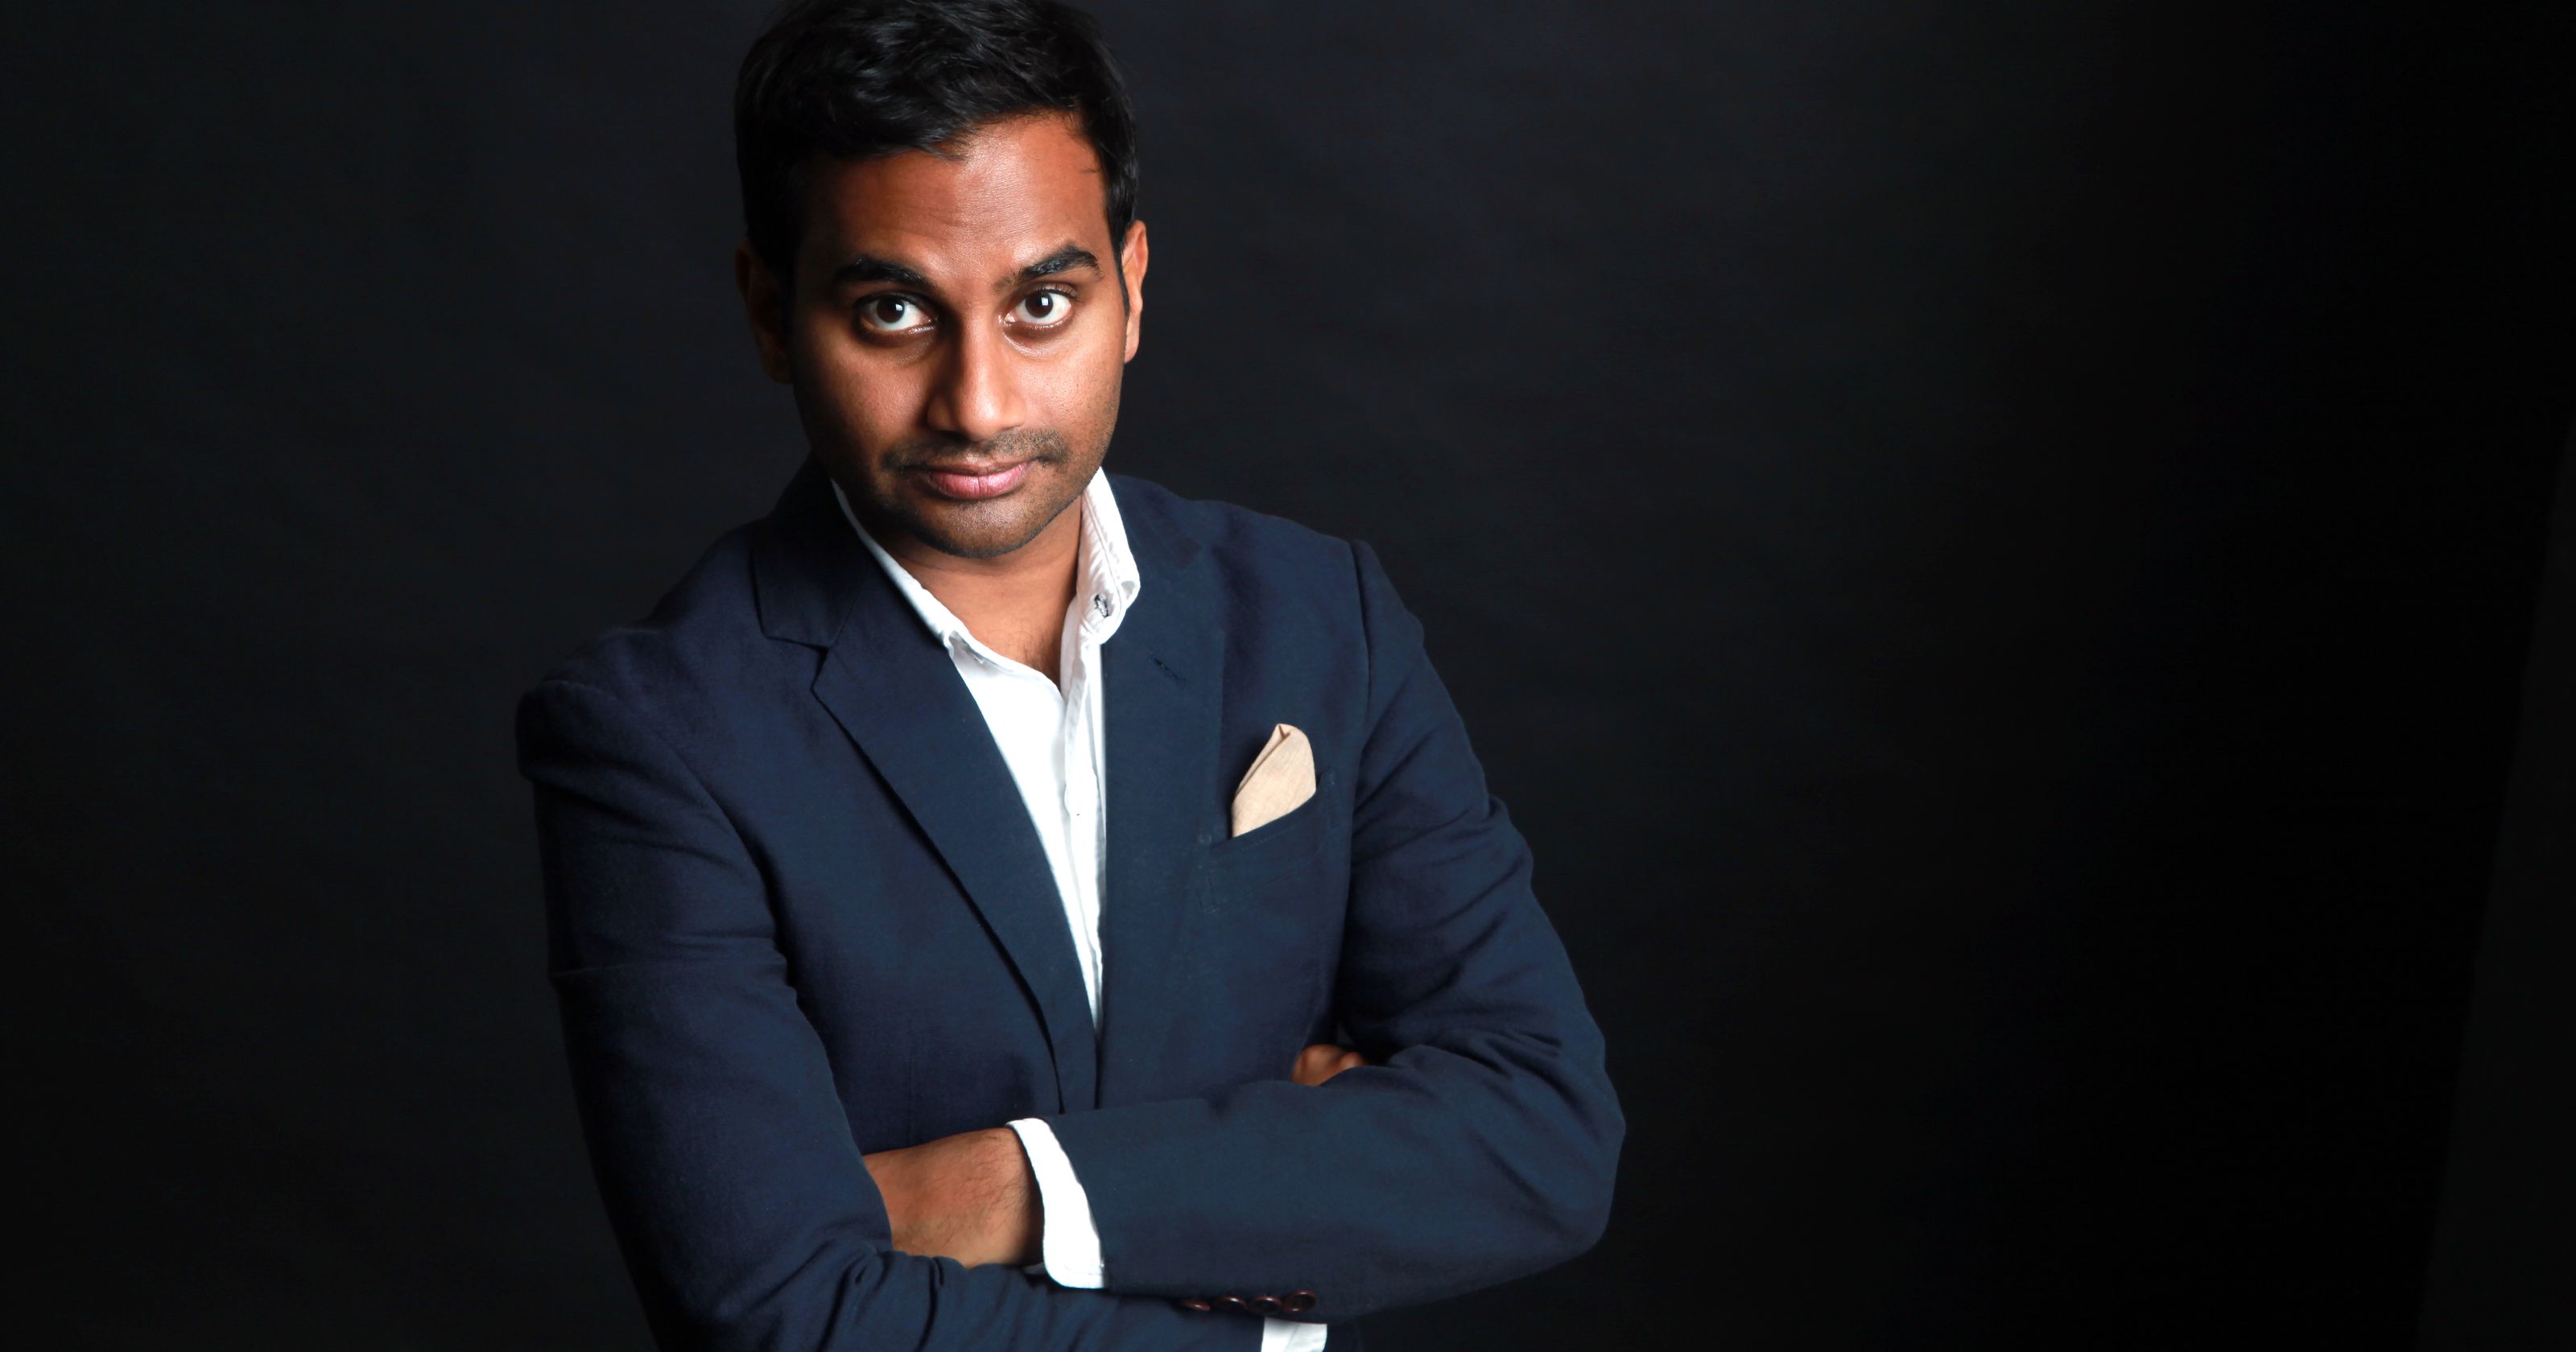 Indian-American comedian Aziz Ansari fears for family’s safety under a Trump administration